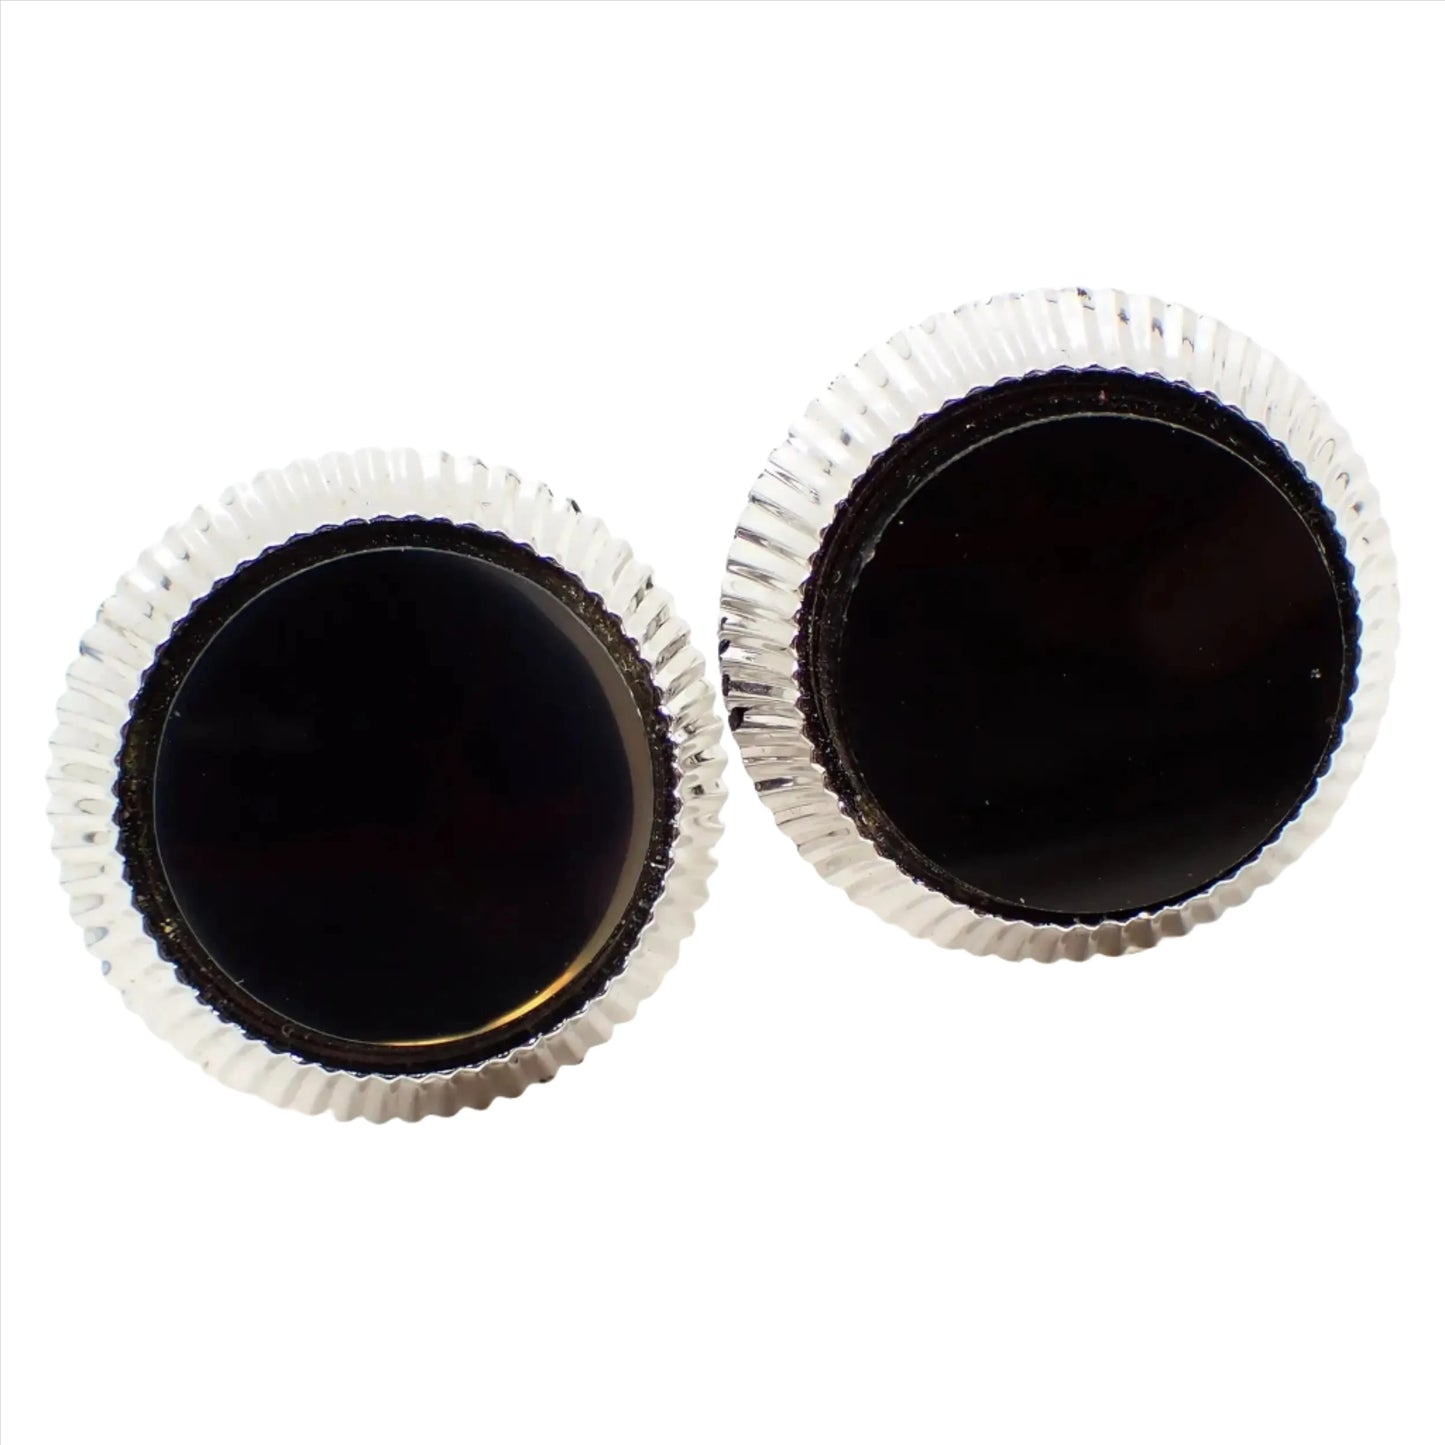 Enlarged front view of the retro vintage Hickok Cufflinks. They are silver tone plated in color and have a round shape. There is a corrugated textured edge and a flat round black glass cab in the middle.